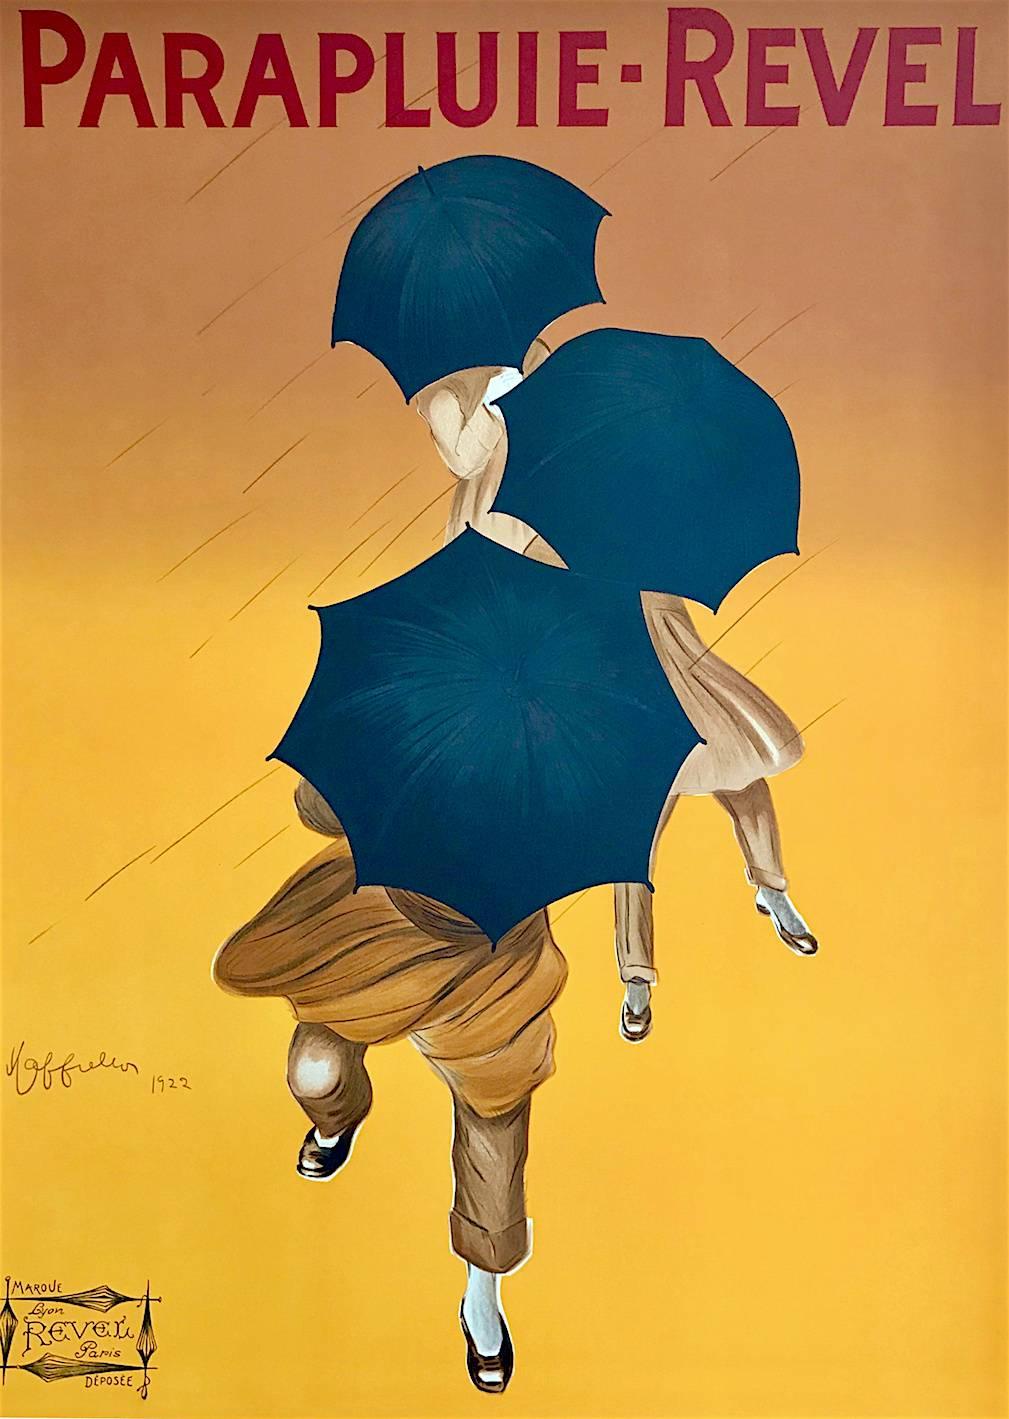 PARAPLUIE REVEL French Umbrellas, Hand Drawn Lithograph, Oversize Art Poster 52